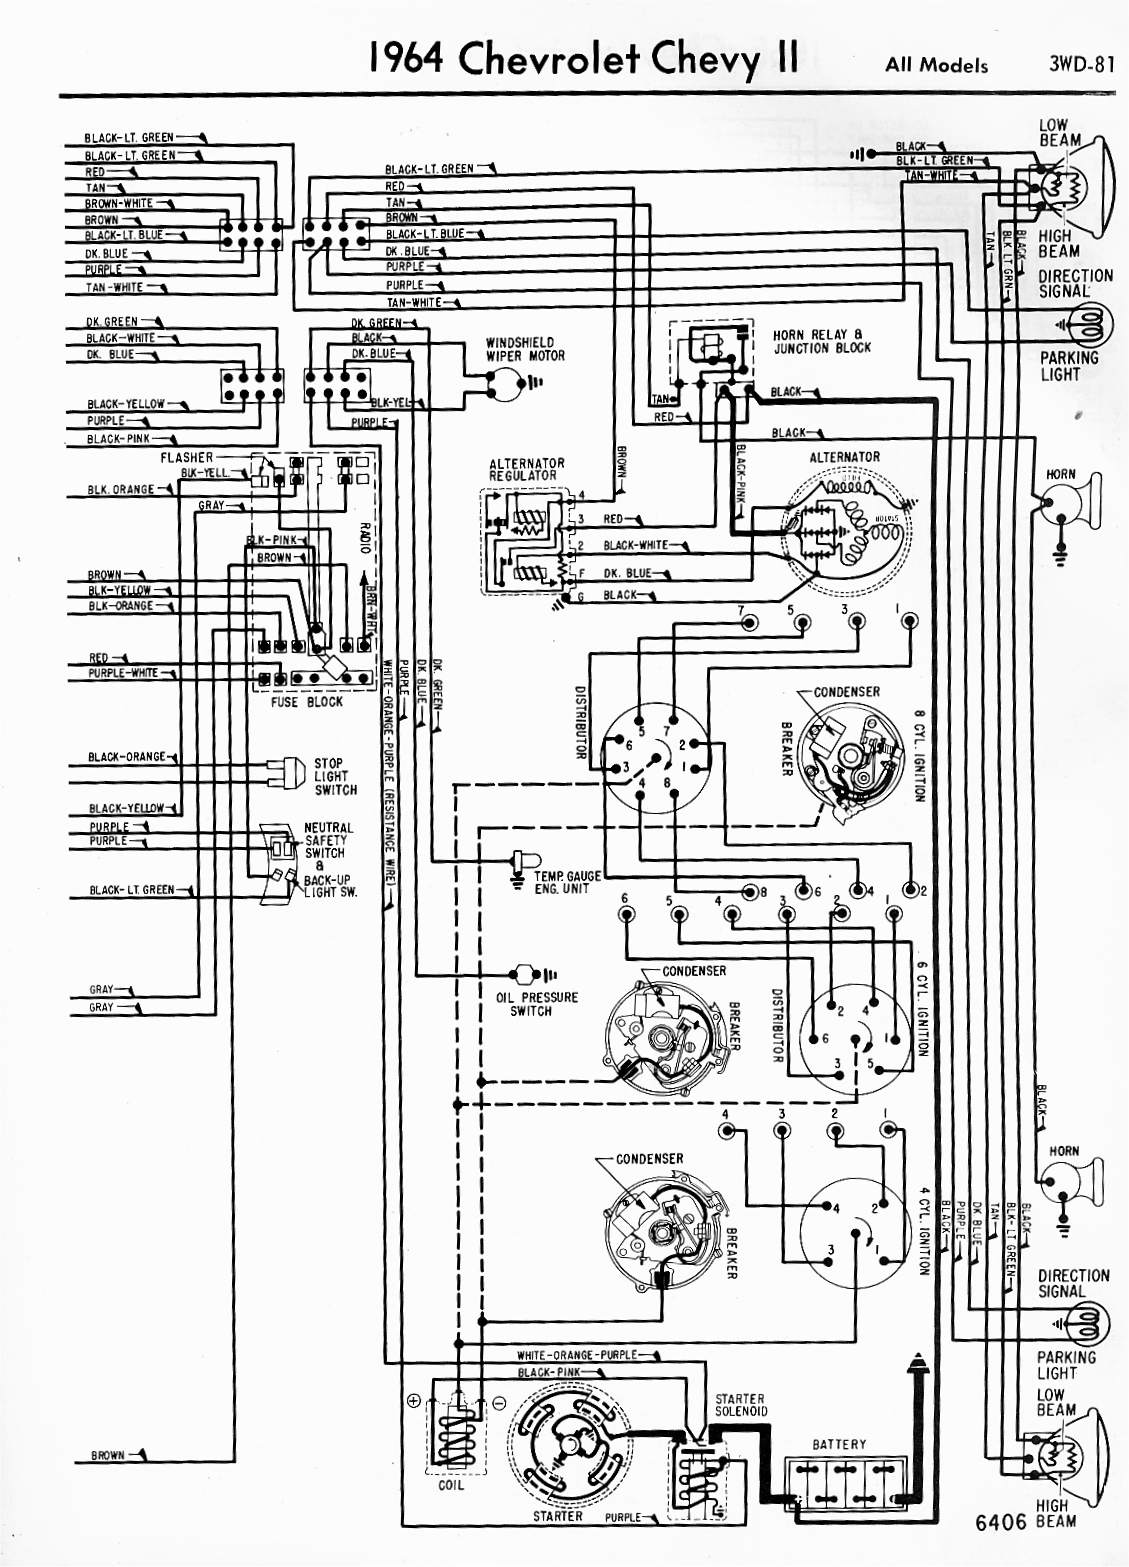 Ignition Wiring For 1972 350 Chevrolet from www.oldcarmanualproject.com